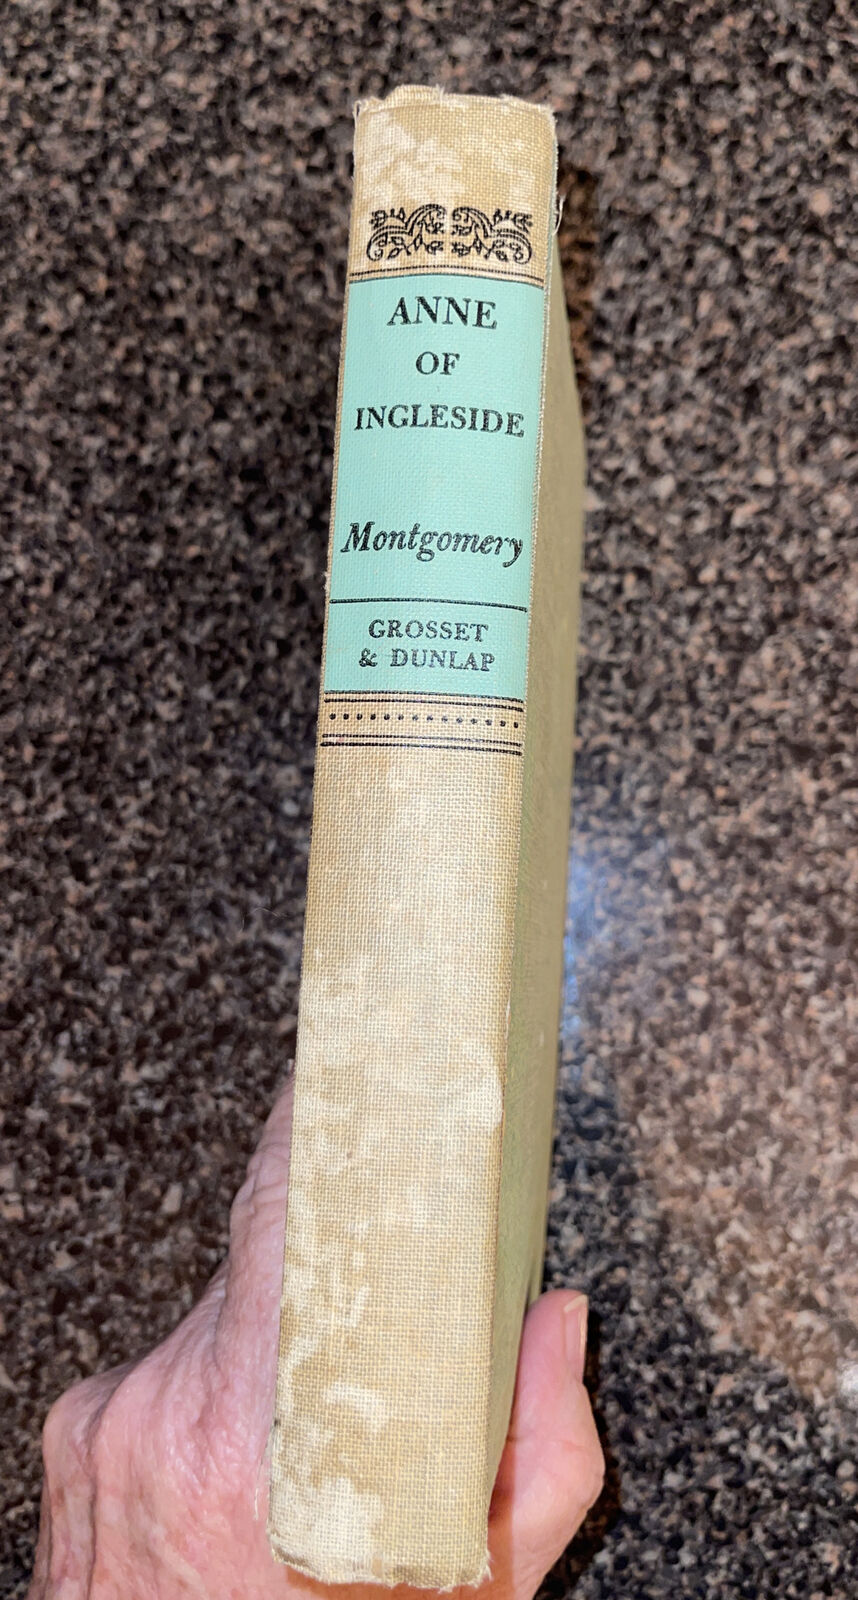 ANNE OF INGLESIDE ANTIQUE BOOK L.M. MONTGOMERY HARDCOVER 1939